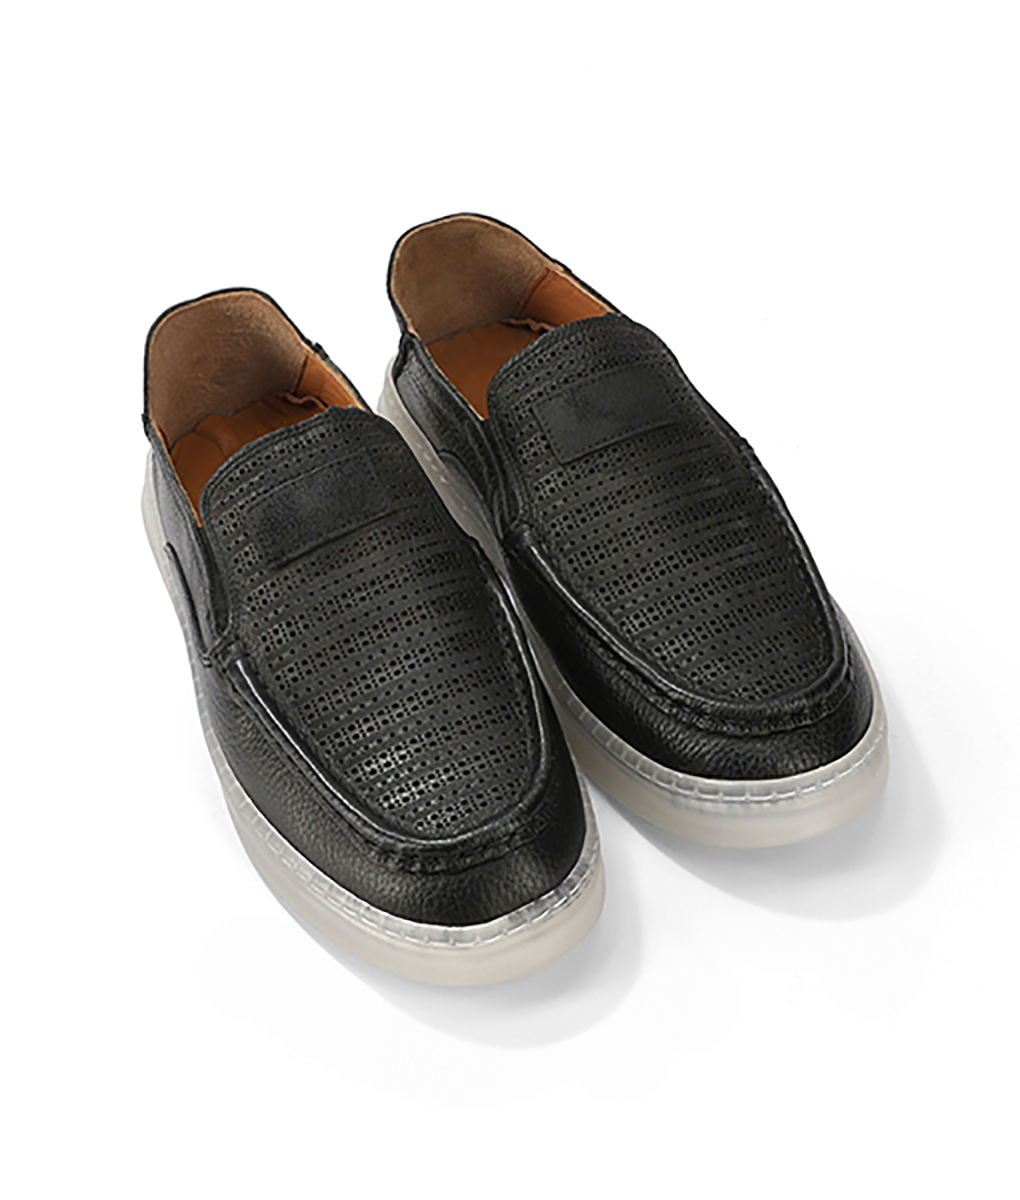 Men's Dotted Black Leather Loafers